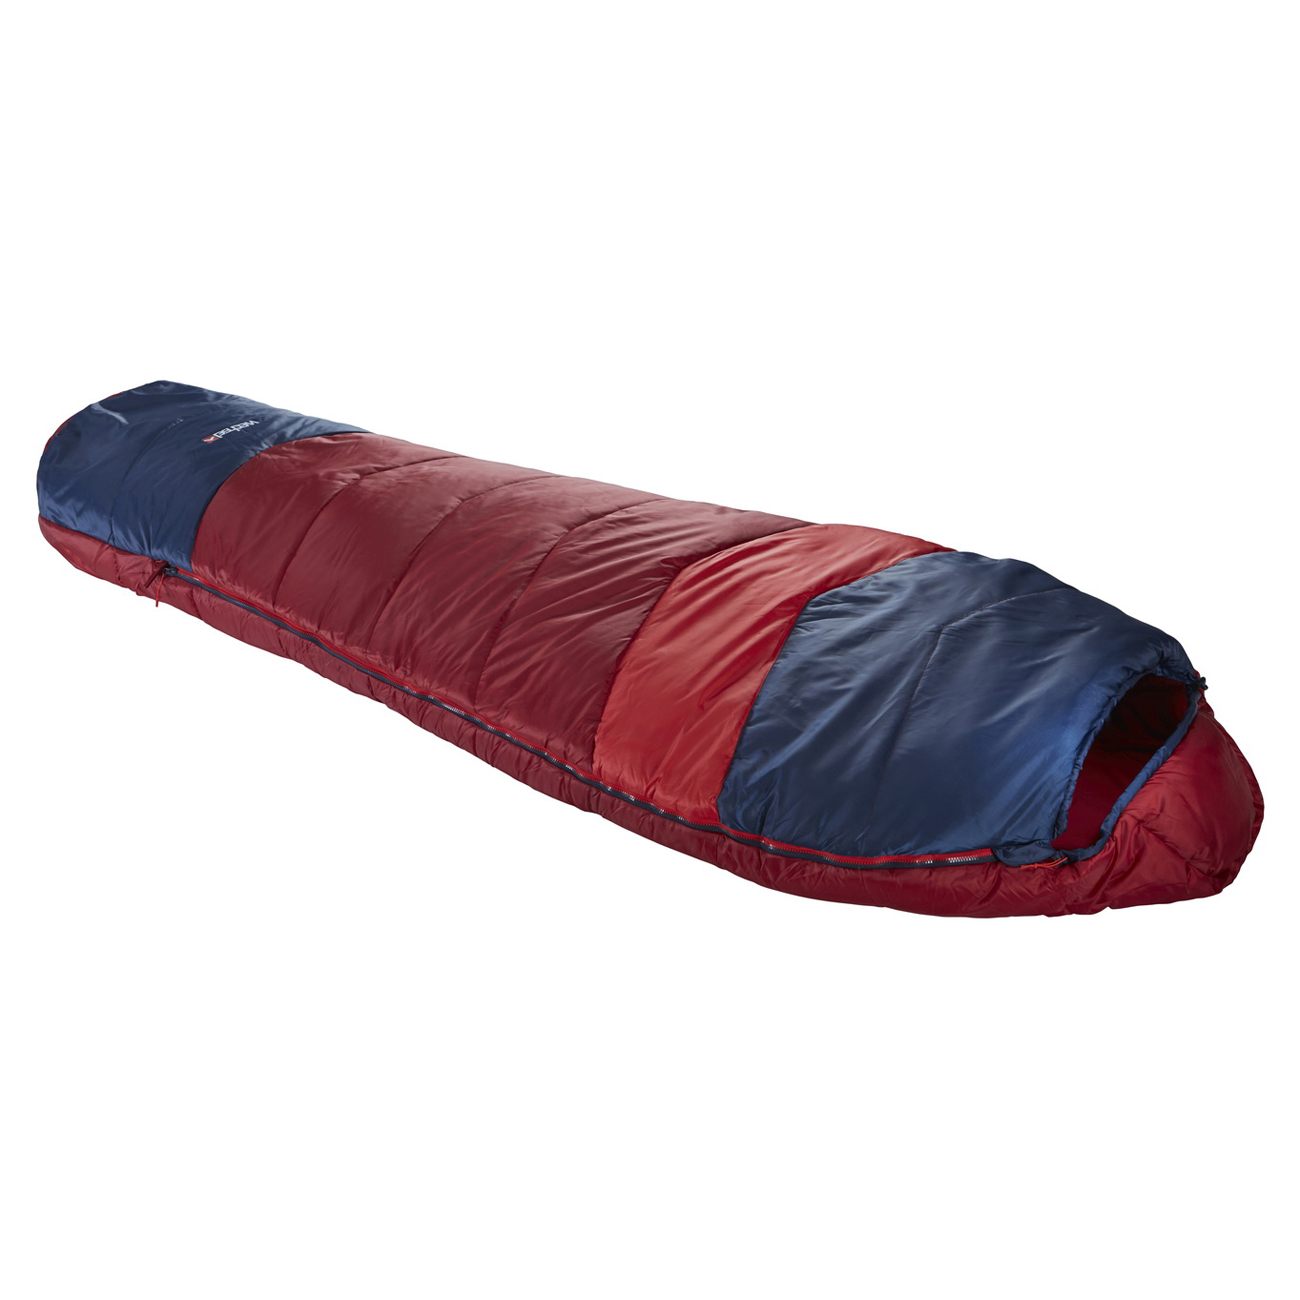 Picture of Wechsel Stardust 0° Sleepingbag - L - 205cm